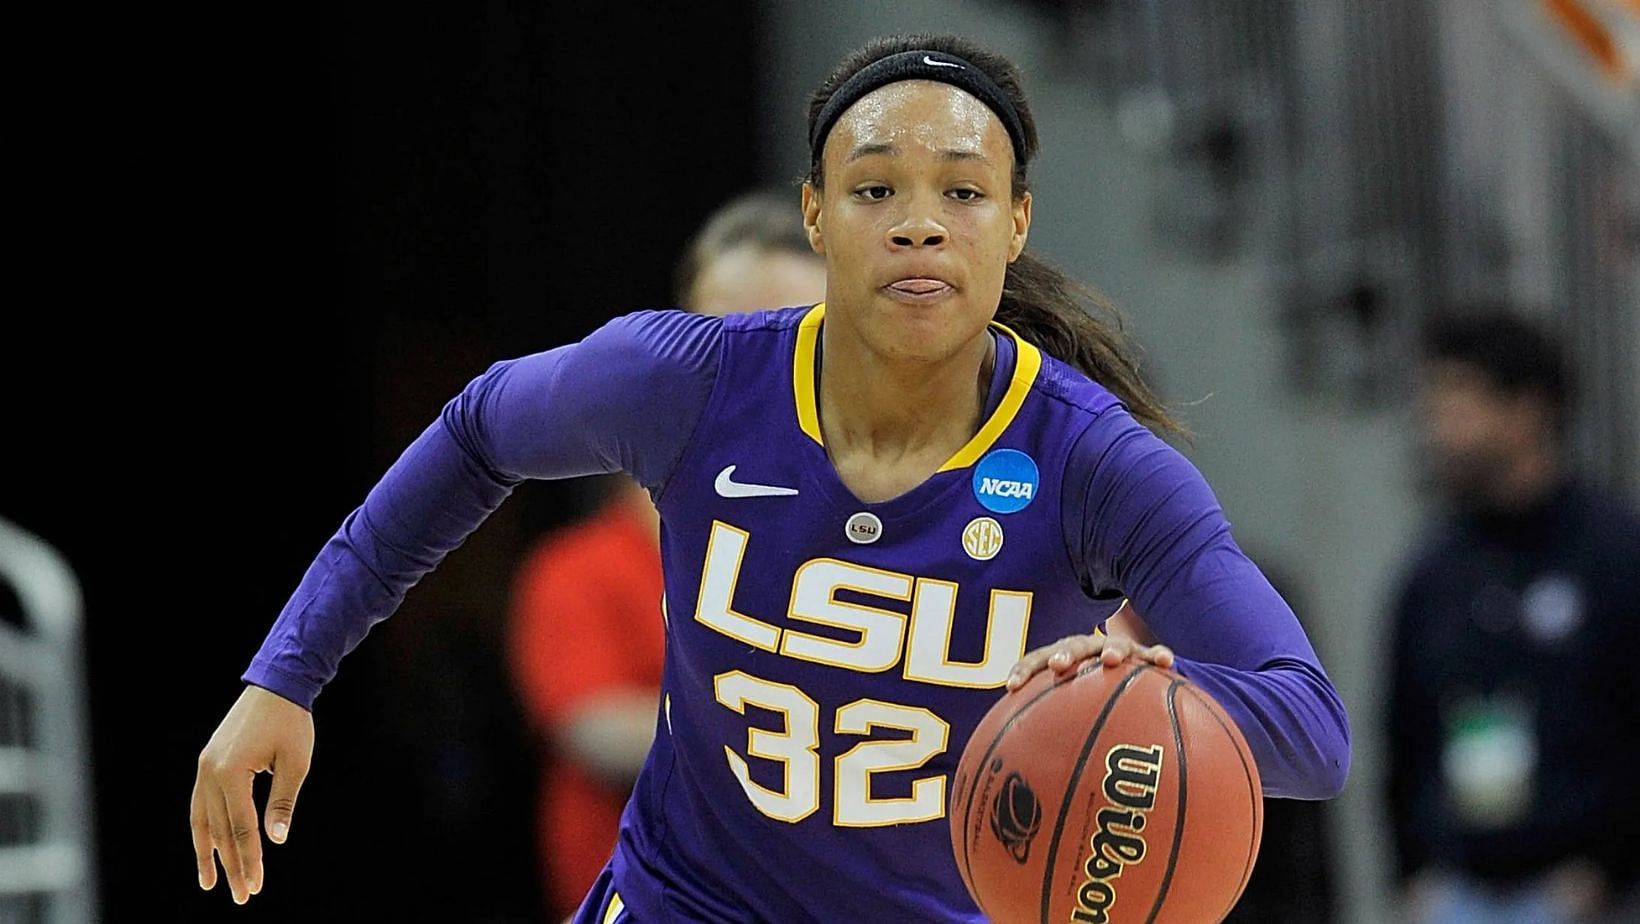 Former LSU Tiger Danielle Ballard was struck by a car hours earlier and died in a Memphis hospital.